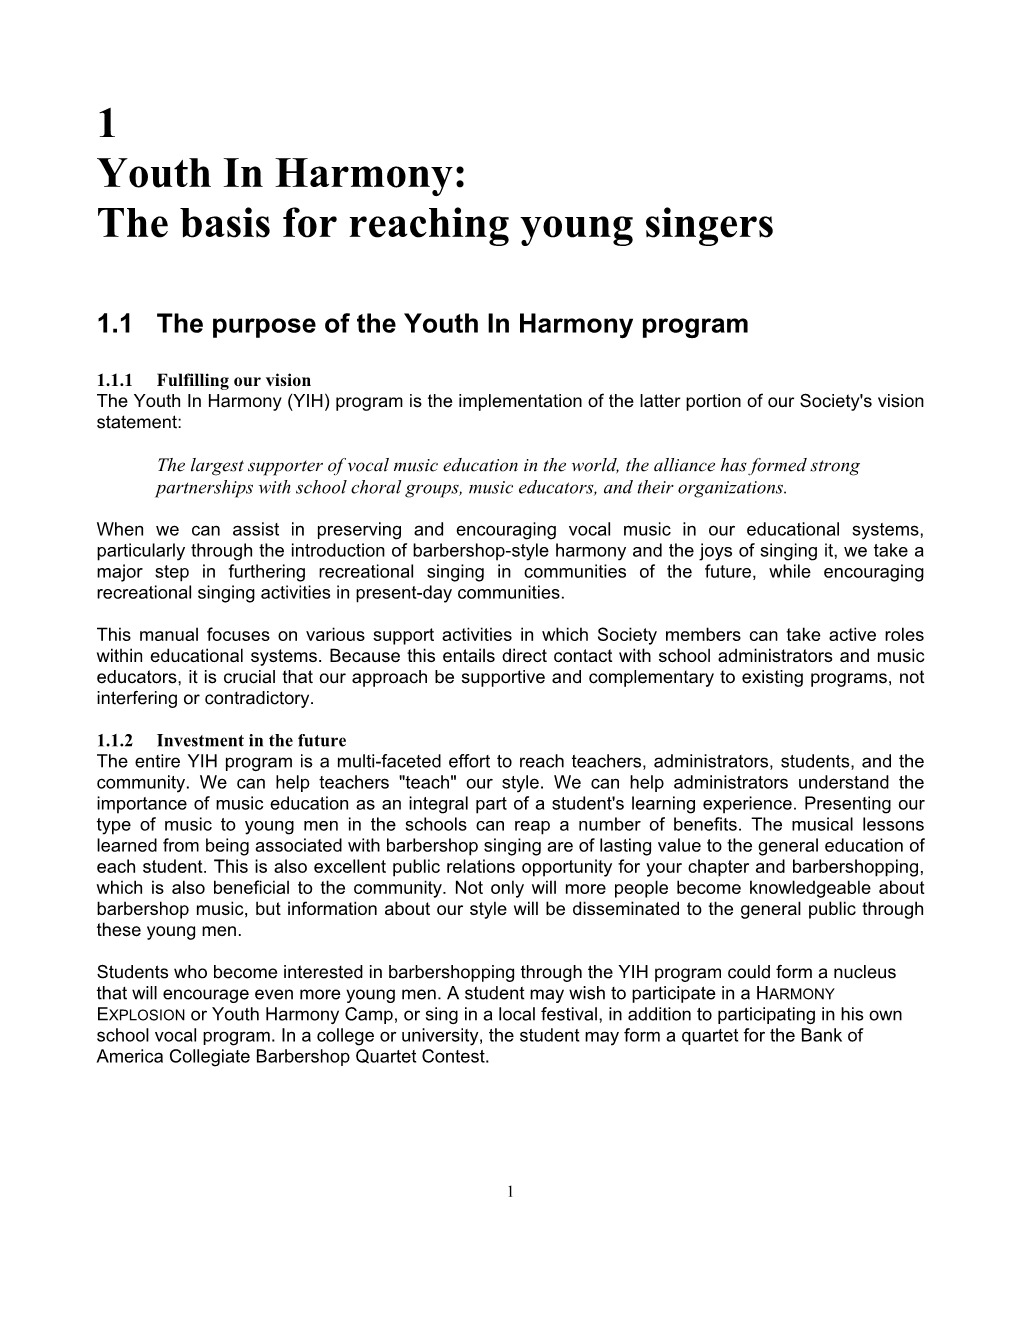 1 Youth in Harmony: the Basis for Reaching Young Singers